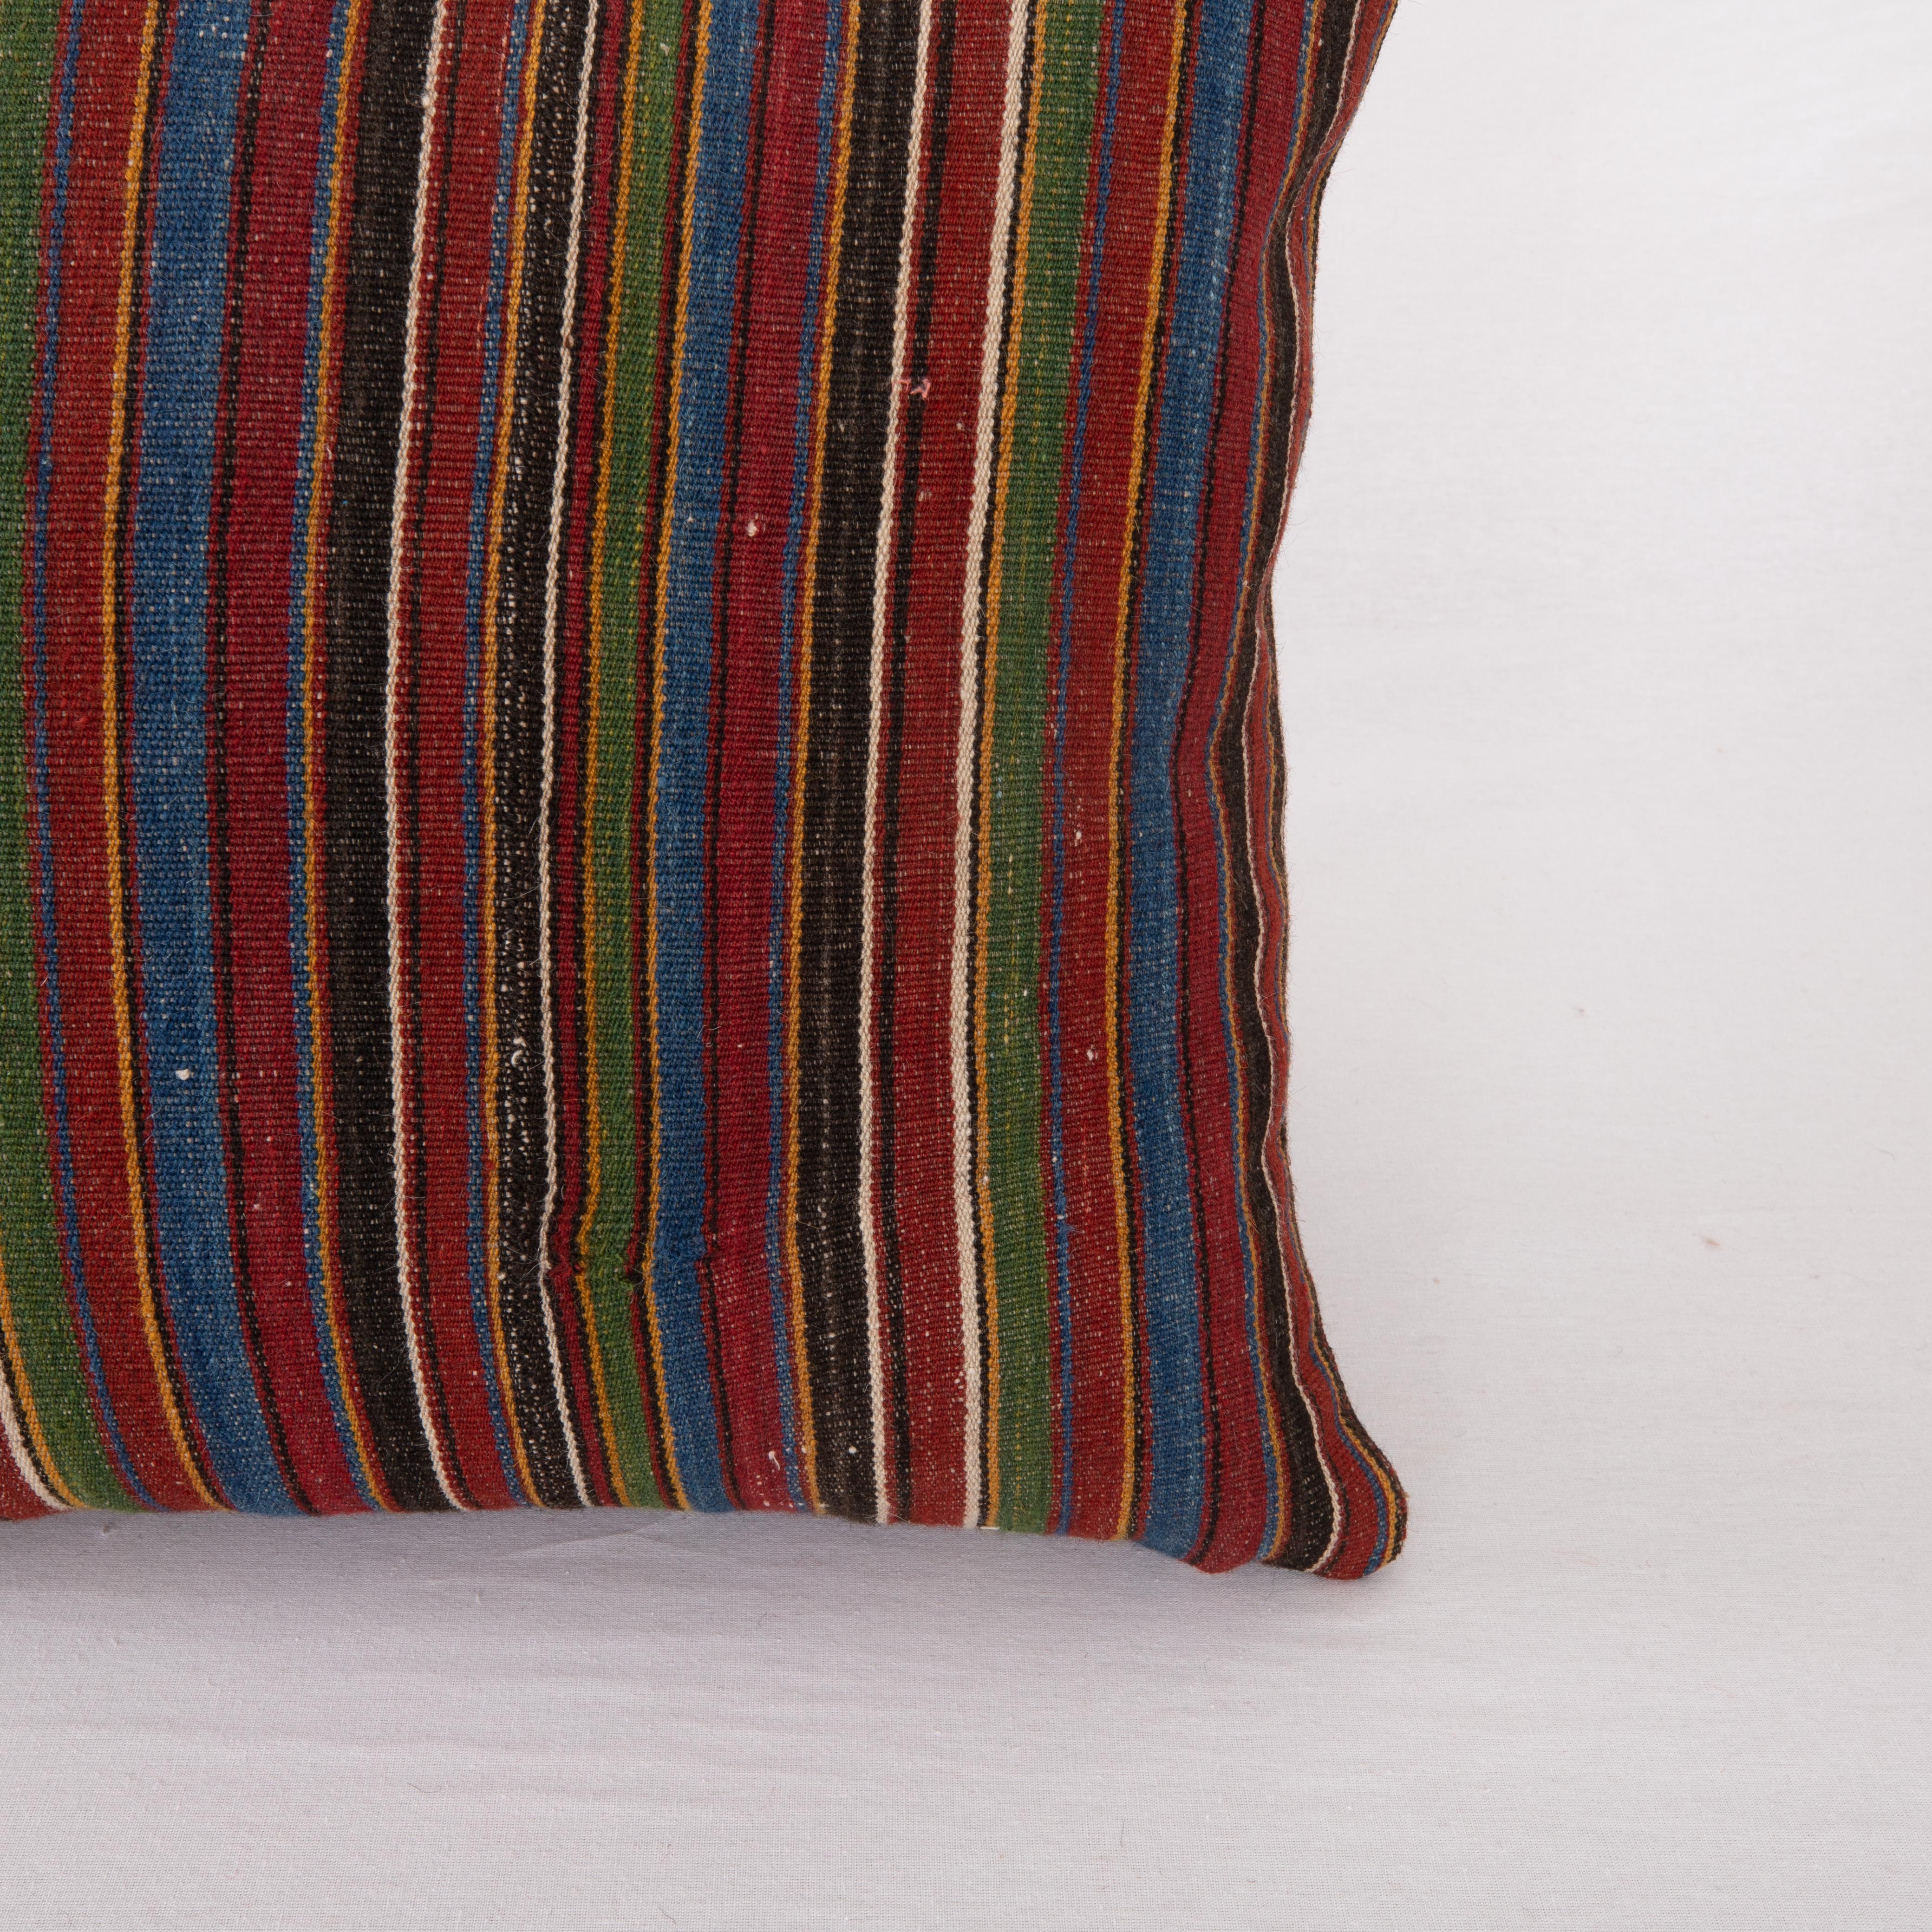 Azerbaijani Double Sided Kilim Pillow Cover Made From an Antique Kilim For Sale